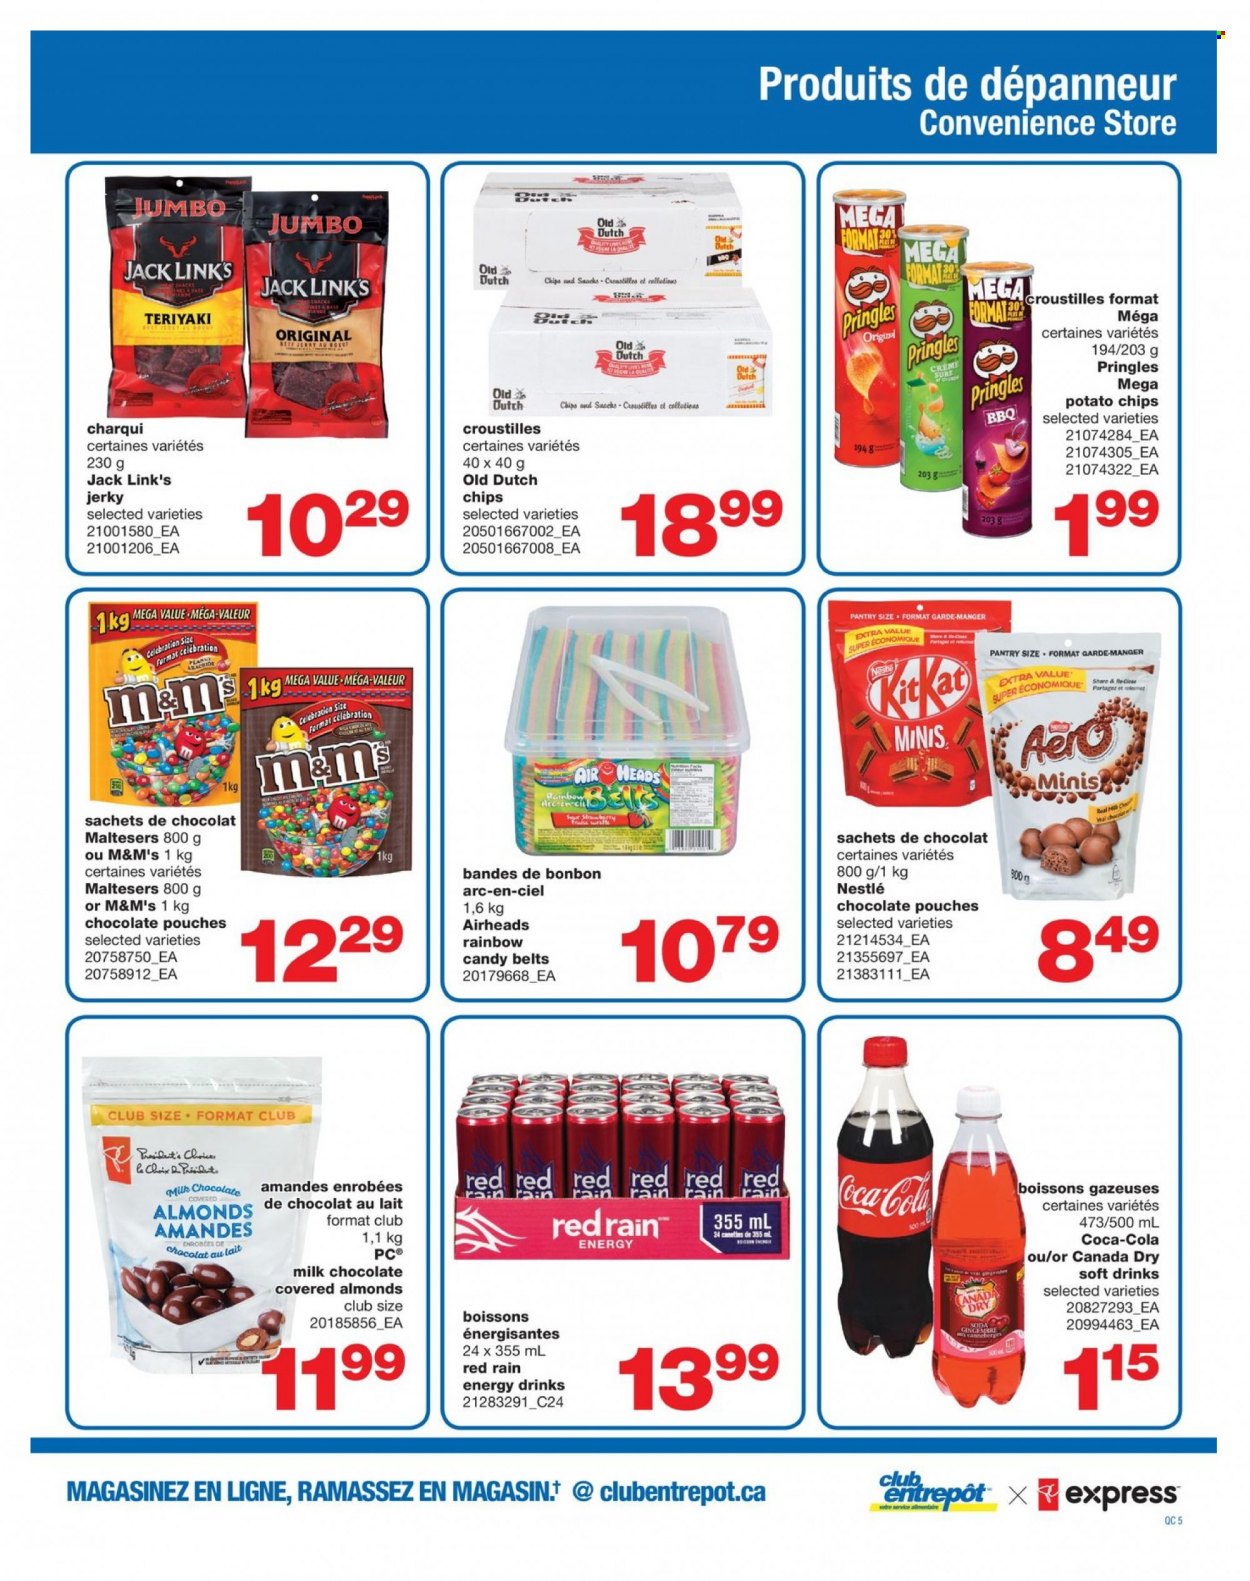 thumbnail - Wholesale Club Flyer - December 02, 2021 - January 05, 2022 - Sales products - beef jerky, jerky, milk chocolate, chocolate, KitKat, Celebration, AirHeads, Maltesers, potato chips, Pringles, Jack Link's, Canada Dry, Coca-Cola, energy drink, soft drink, soda, Nestlé, chips, M&M's. Page 5.